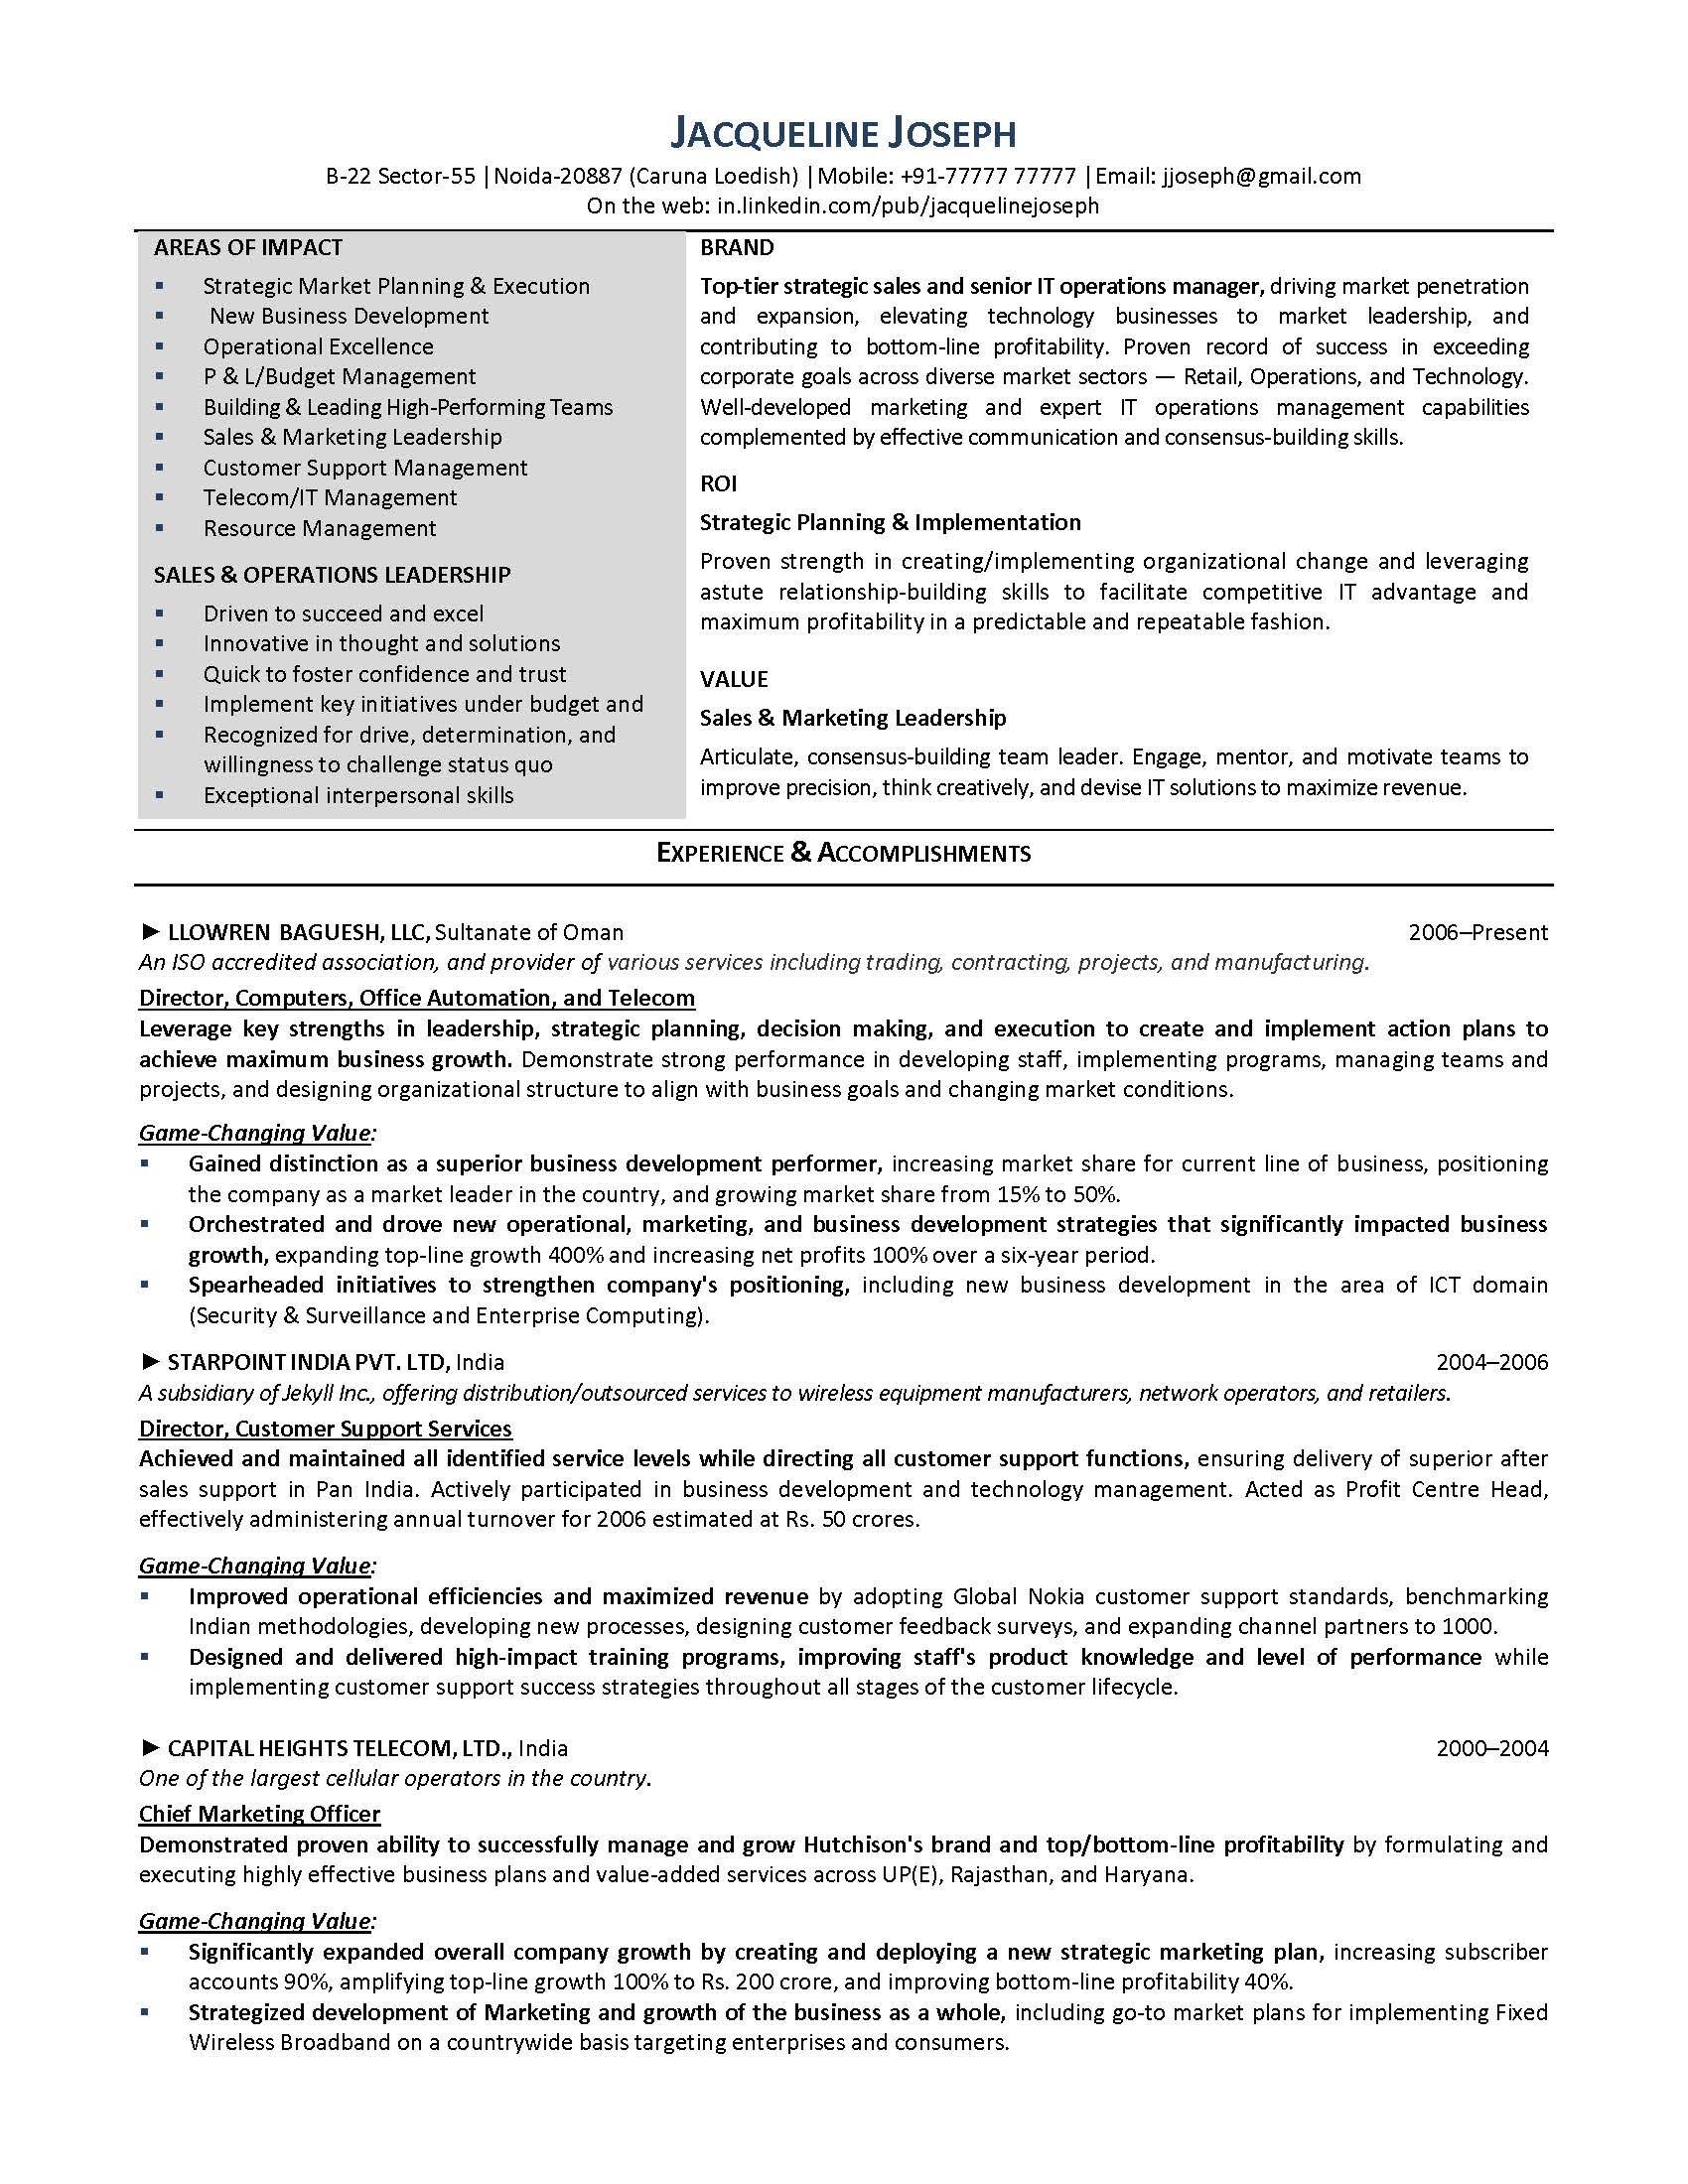 IT resume sample 1, provided by Elite Resume Writing Services